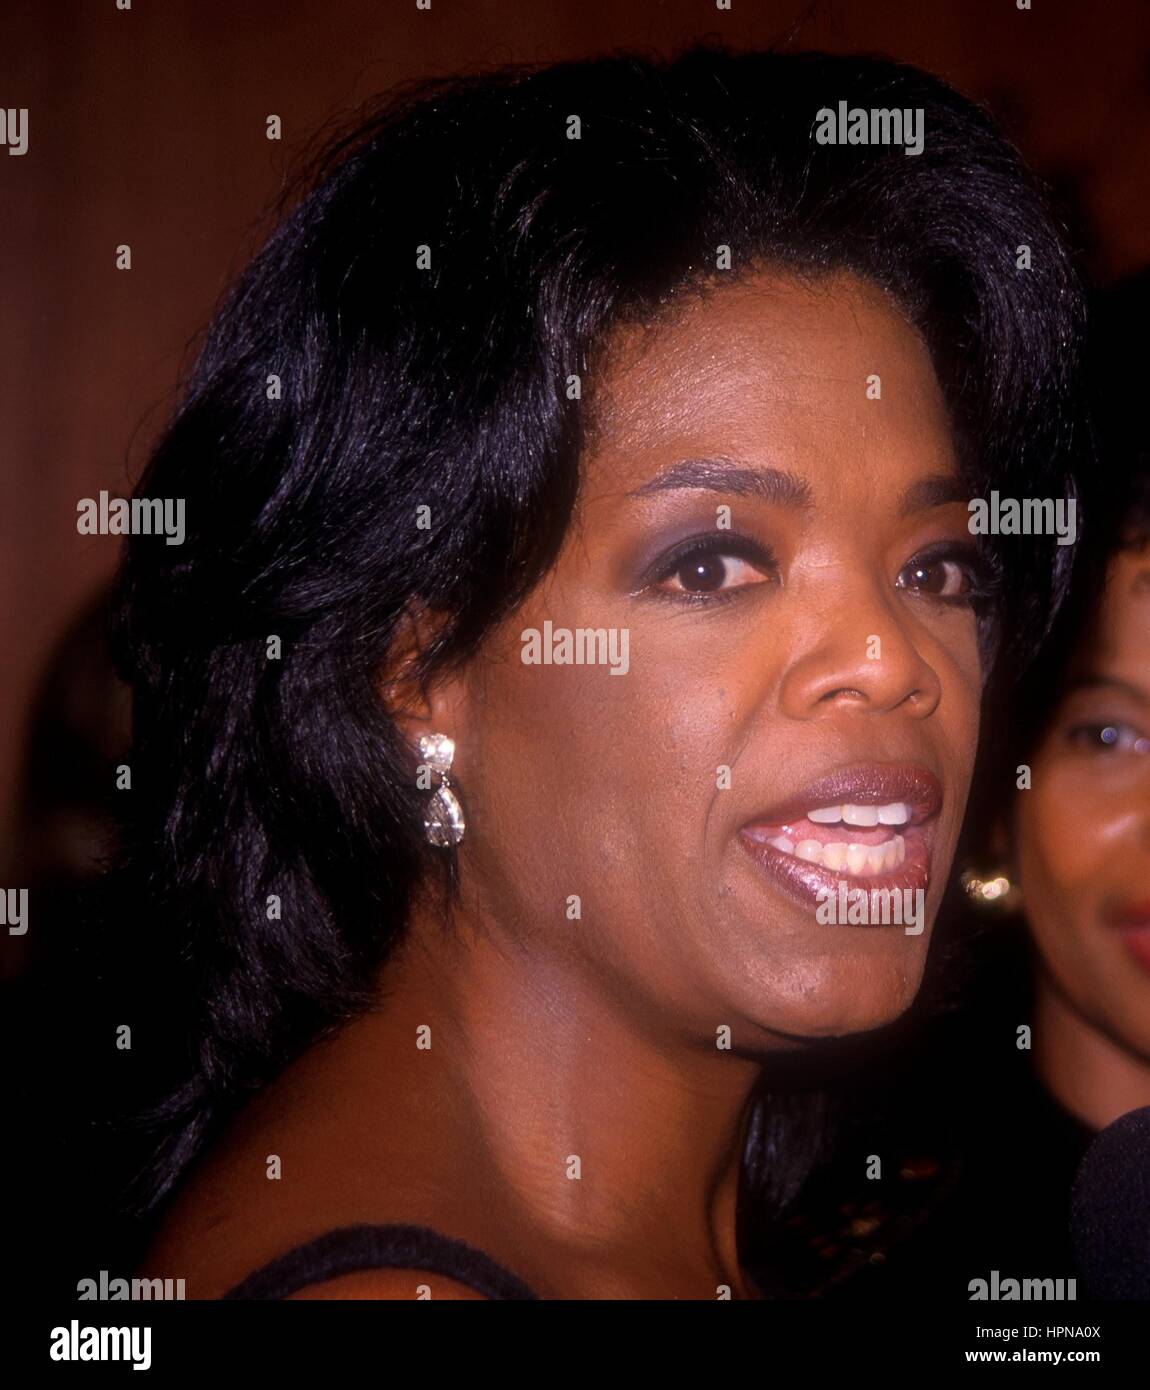 OPRAH WINFREY 10/8/98 PREMIERE OF 'BELOVED' AT THE ZIEGFIELD THEATER, NYC CREDIT ALL USES Stock Photo